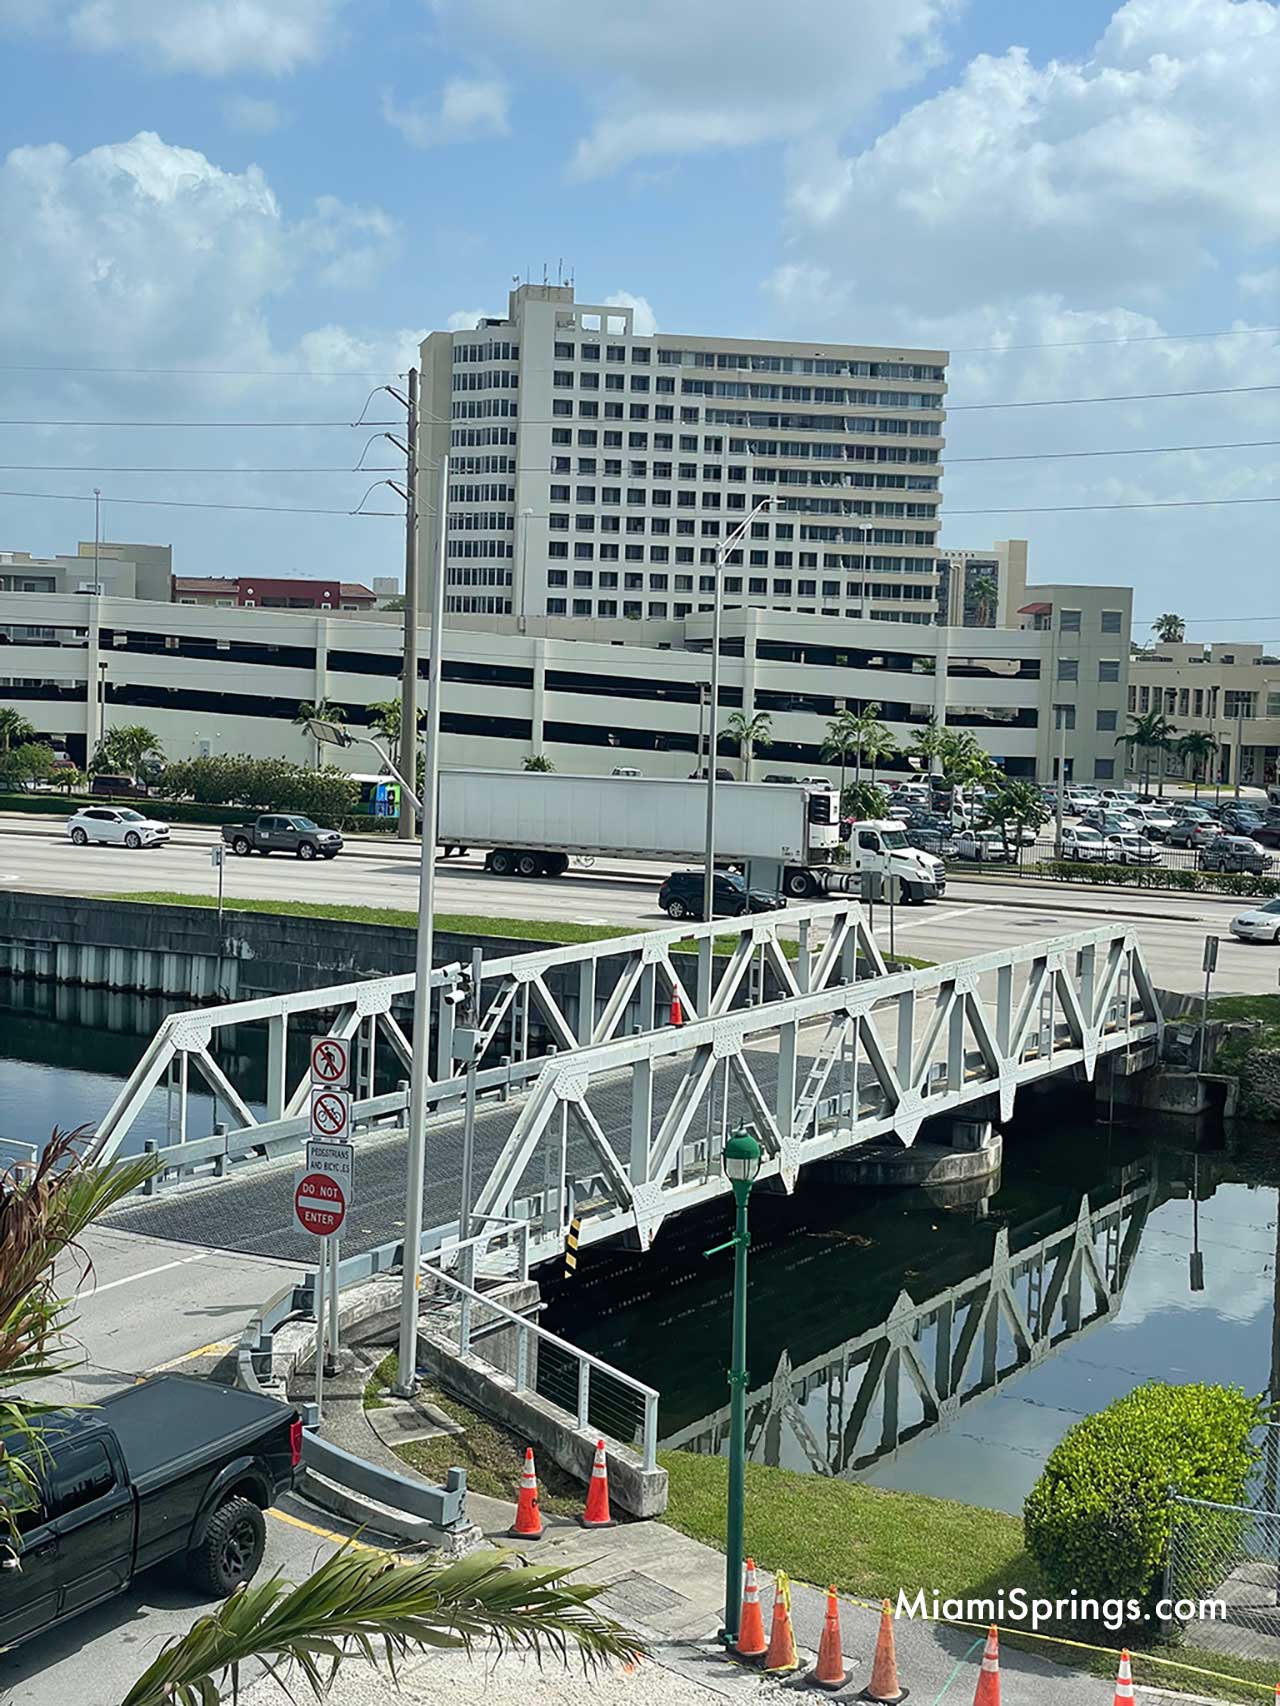 Warren Pony Swing Bridge as viewed from One Curtiss Parkway in Miami Springs